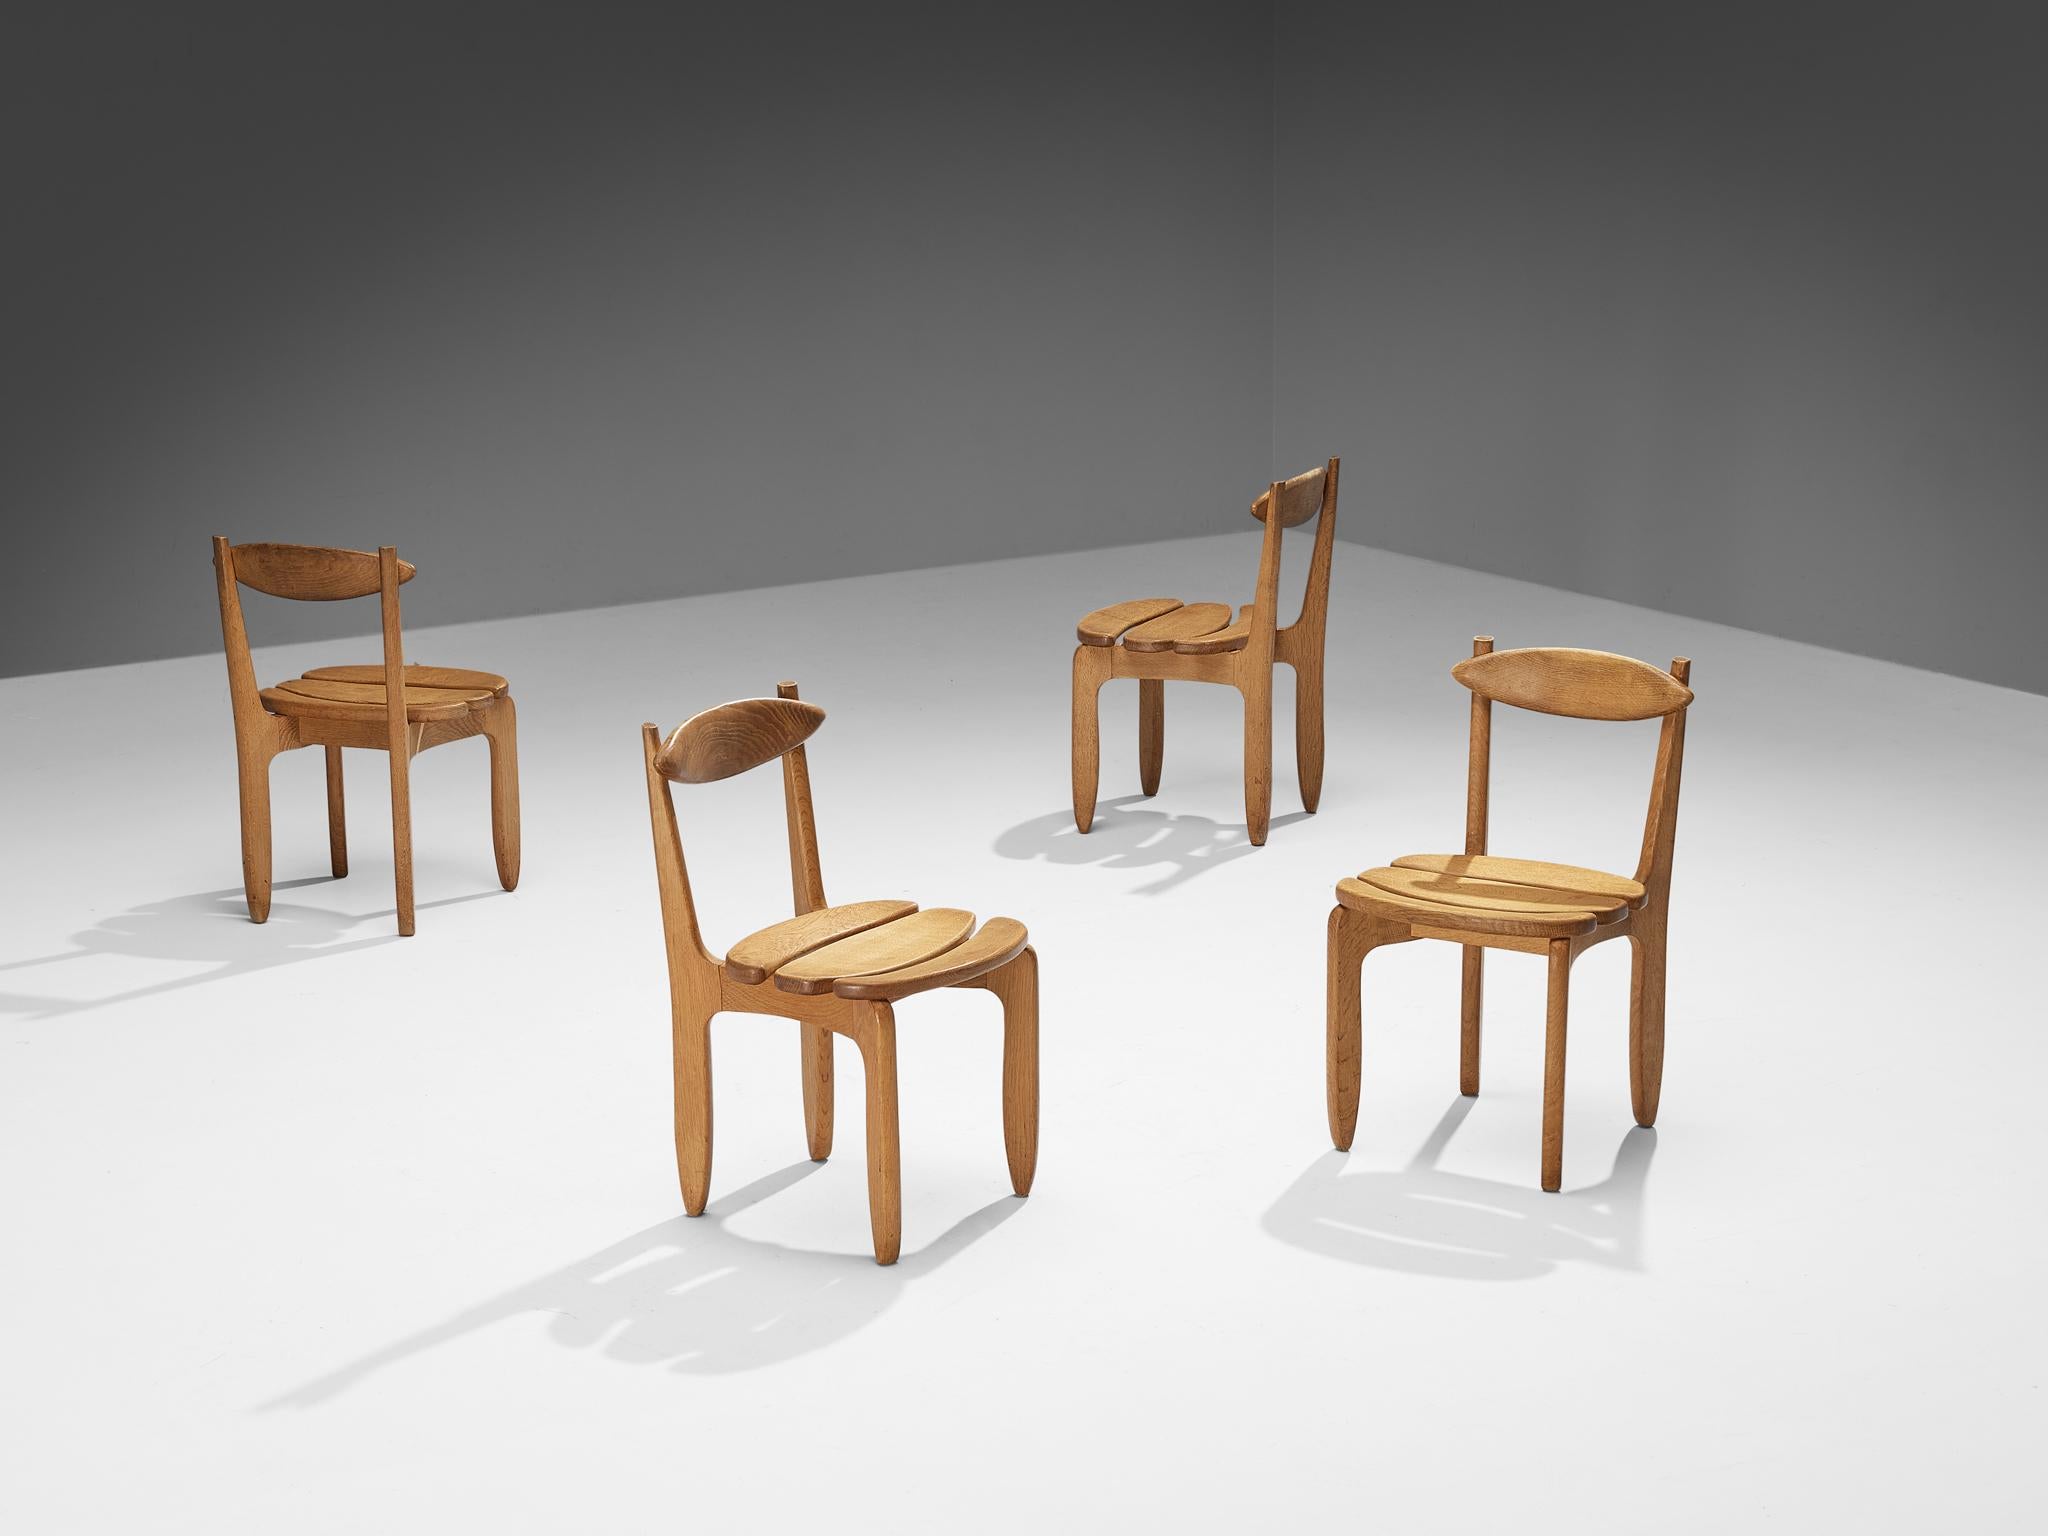 Guillerme et Chambron for Votre Maison, set of four 'Thierry' dining chairs, oak, France, 1960s.

Set of four elegant and robust dining chairs in solid oak by Guillerme and Chambron. These chairs show the characteristic frame of this French designer